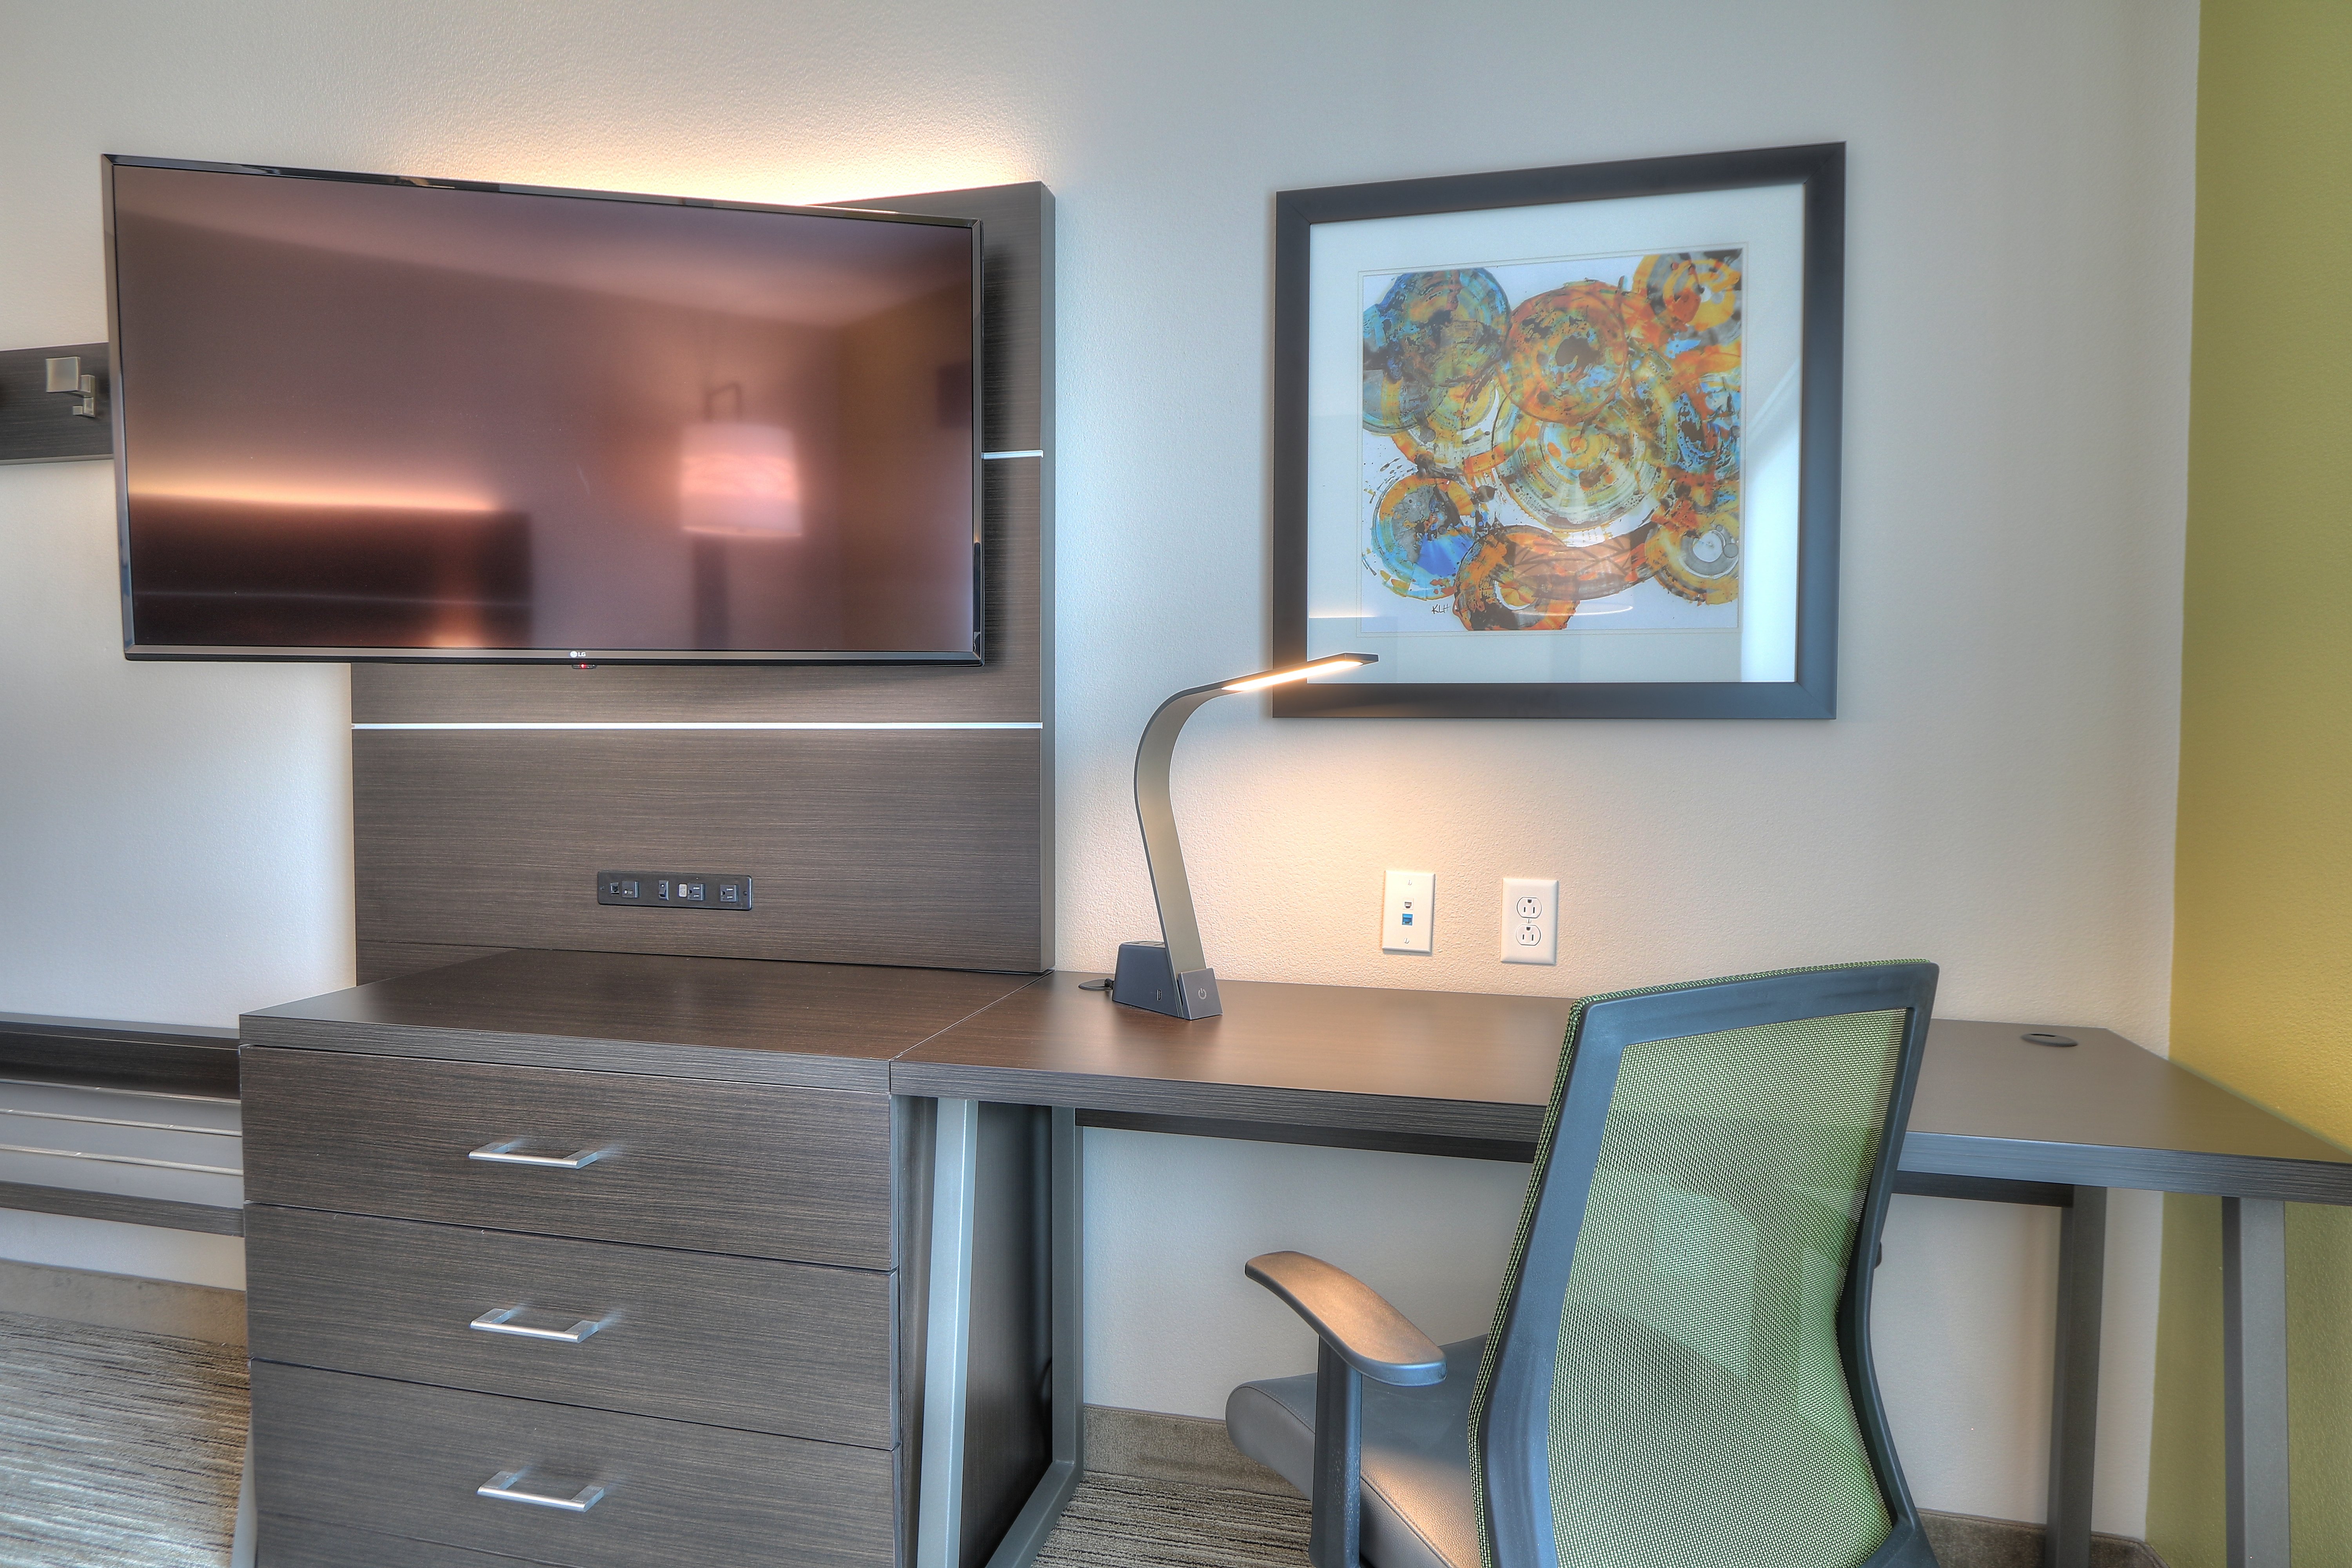 Extra Outlets and USB ports are featured throughout our rooms. 